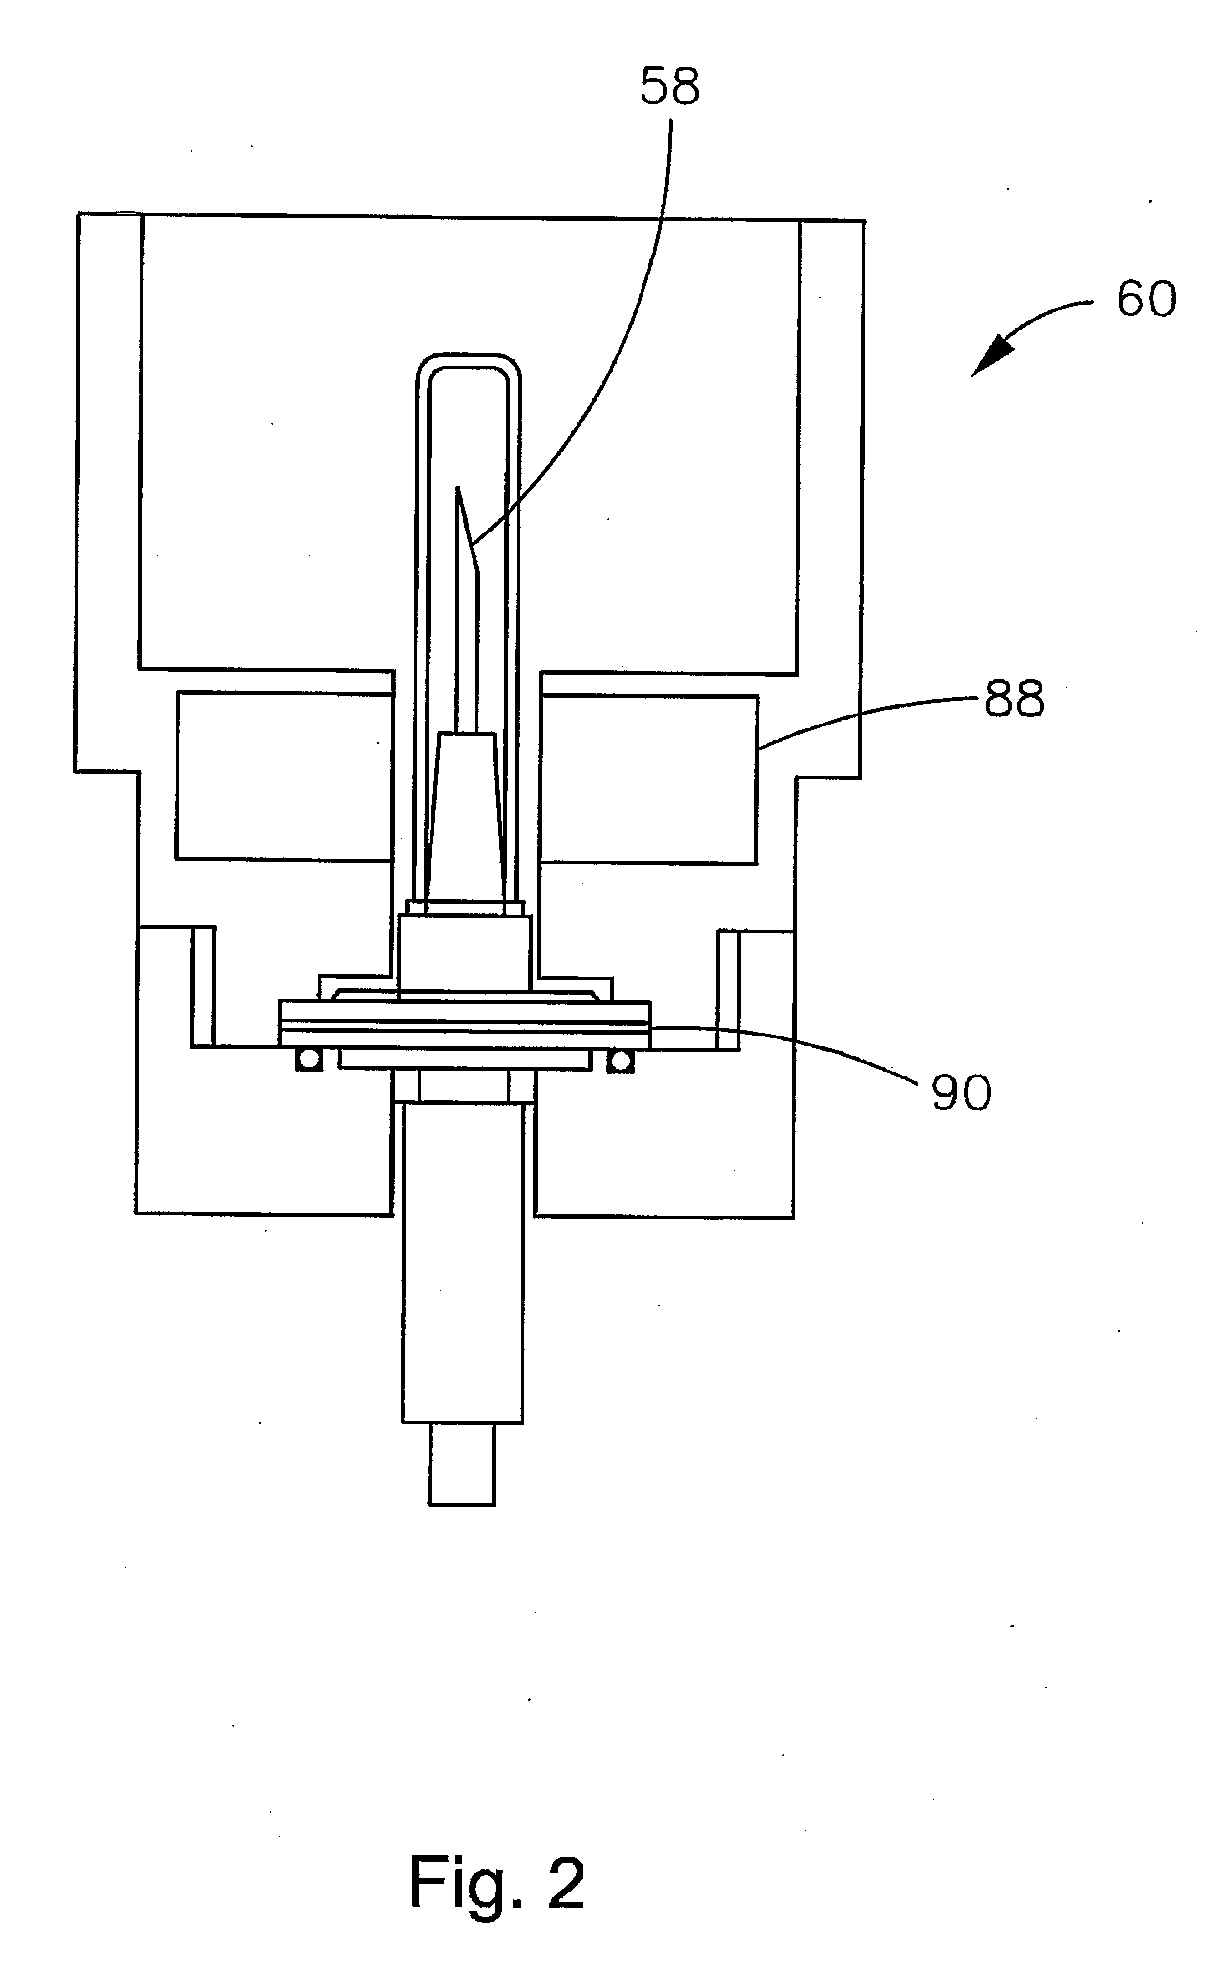 Systems and Methods for Radioisotope Generation